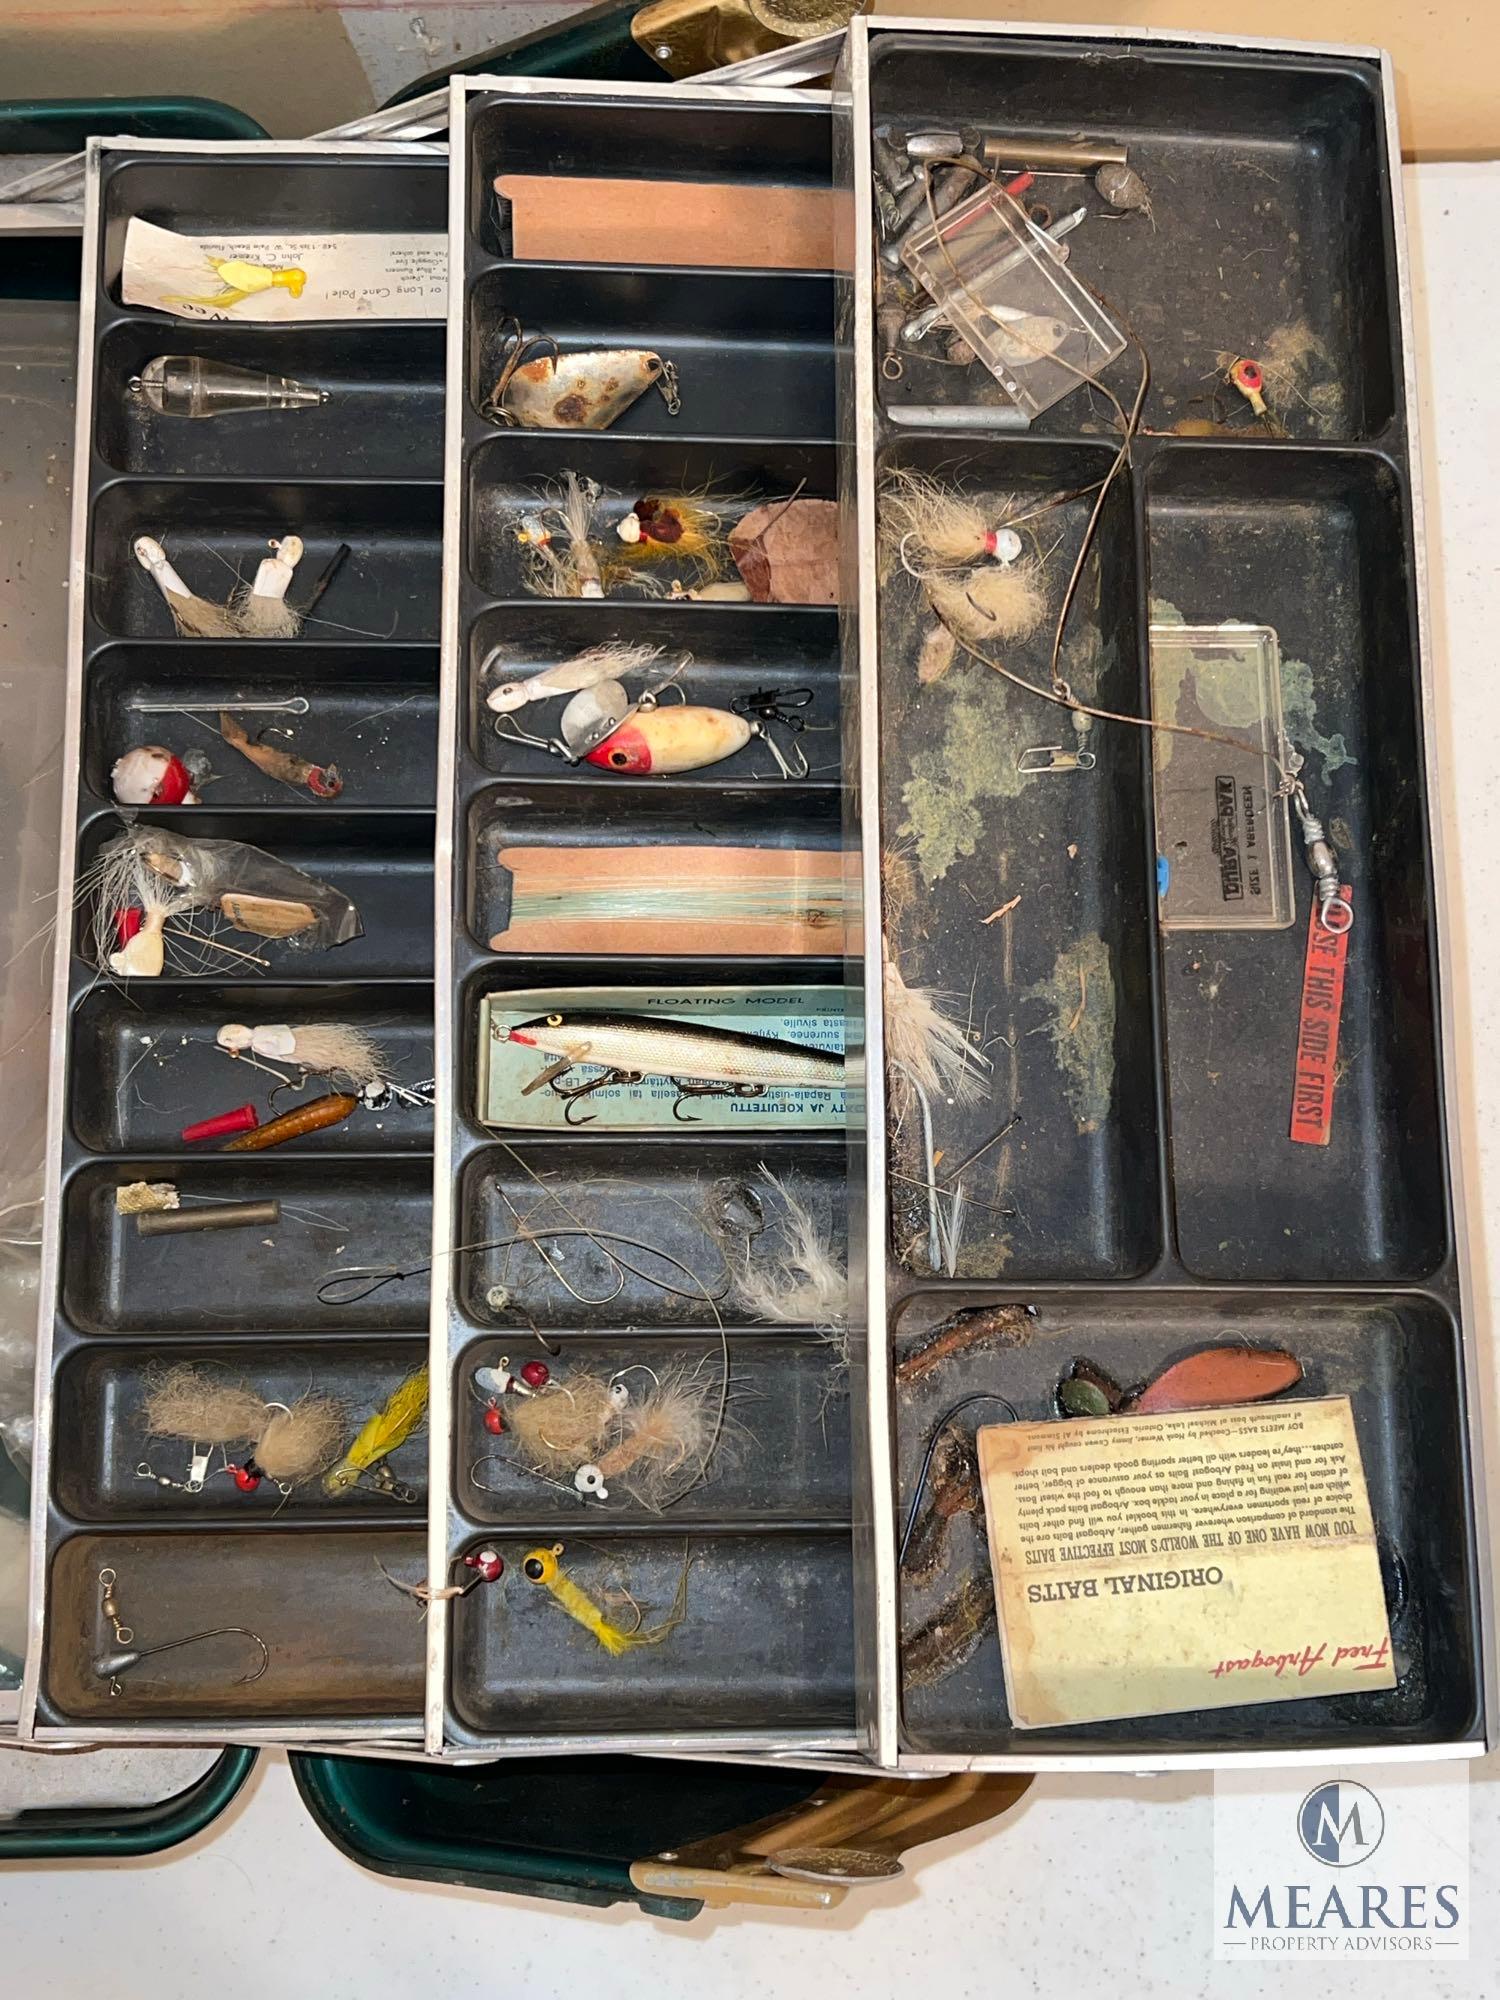 Vintage UMCO Fishing Tackle Box with Baits, Lures